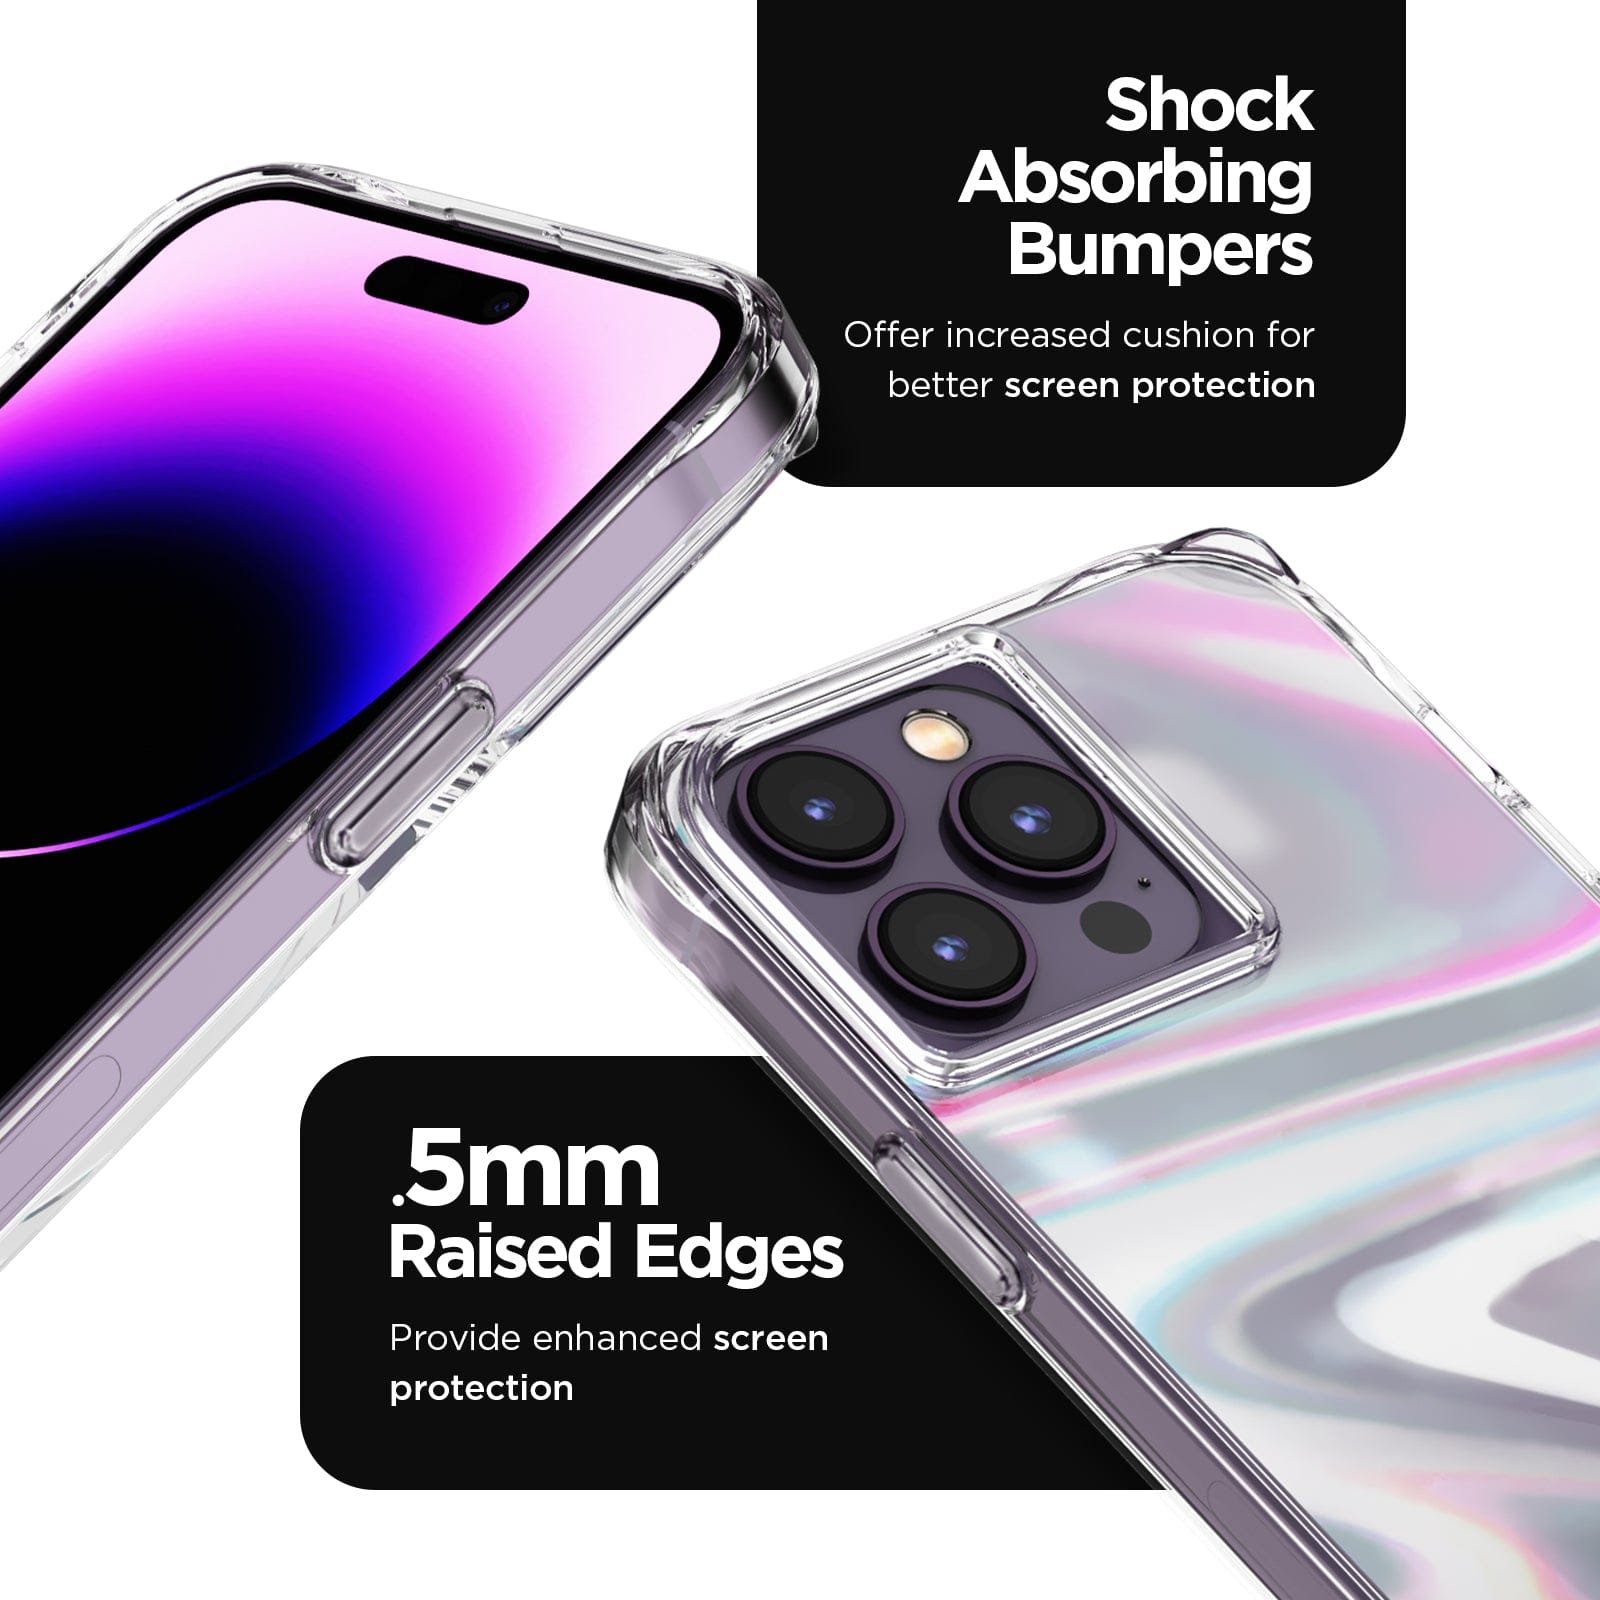 SHOCK ABSORBING BUMPERS. OFFER INCREASED CUSHION FOR BETTER SCREEN PROTECTION. .5MM RAISED EDGES. PROVIDE ENHANCED SCREEN PROTECTION. 